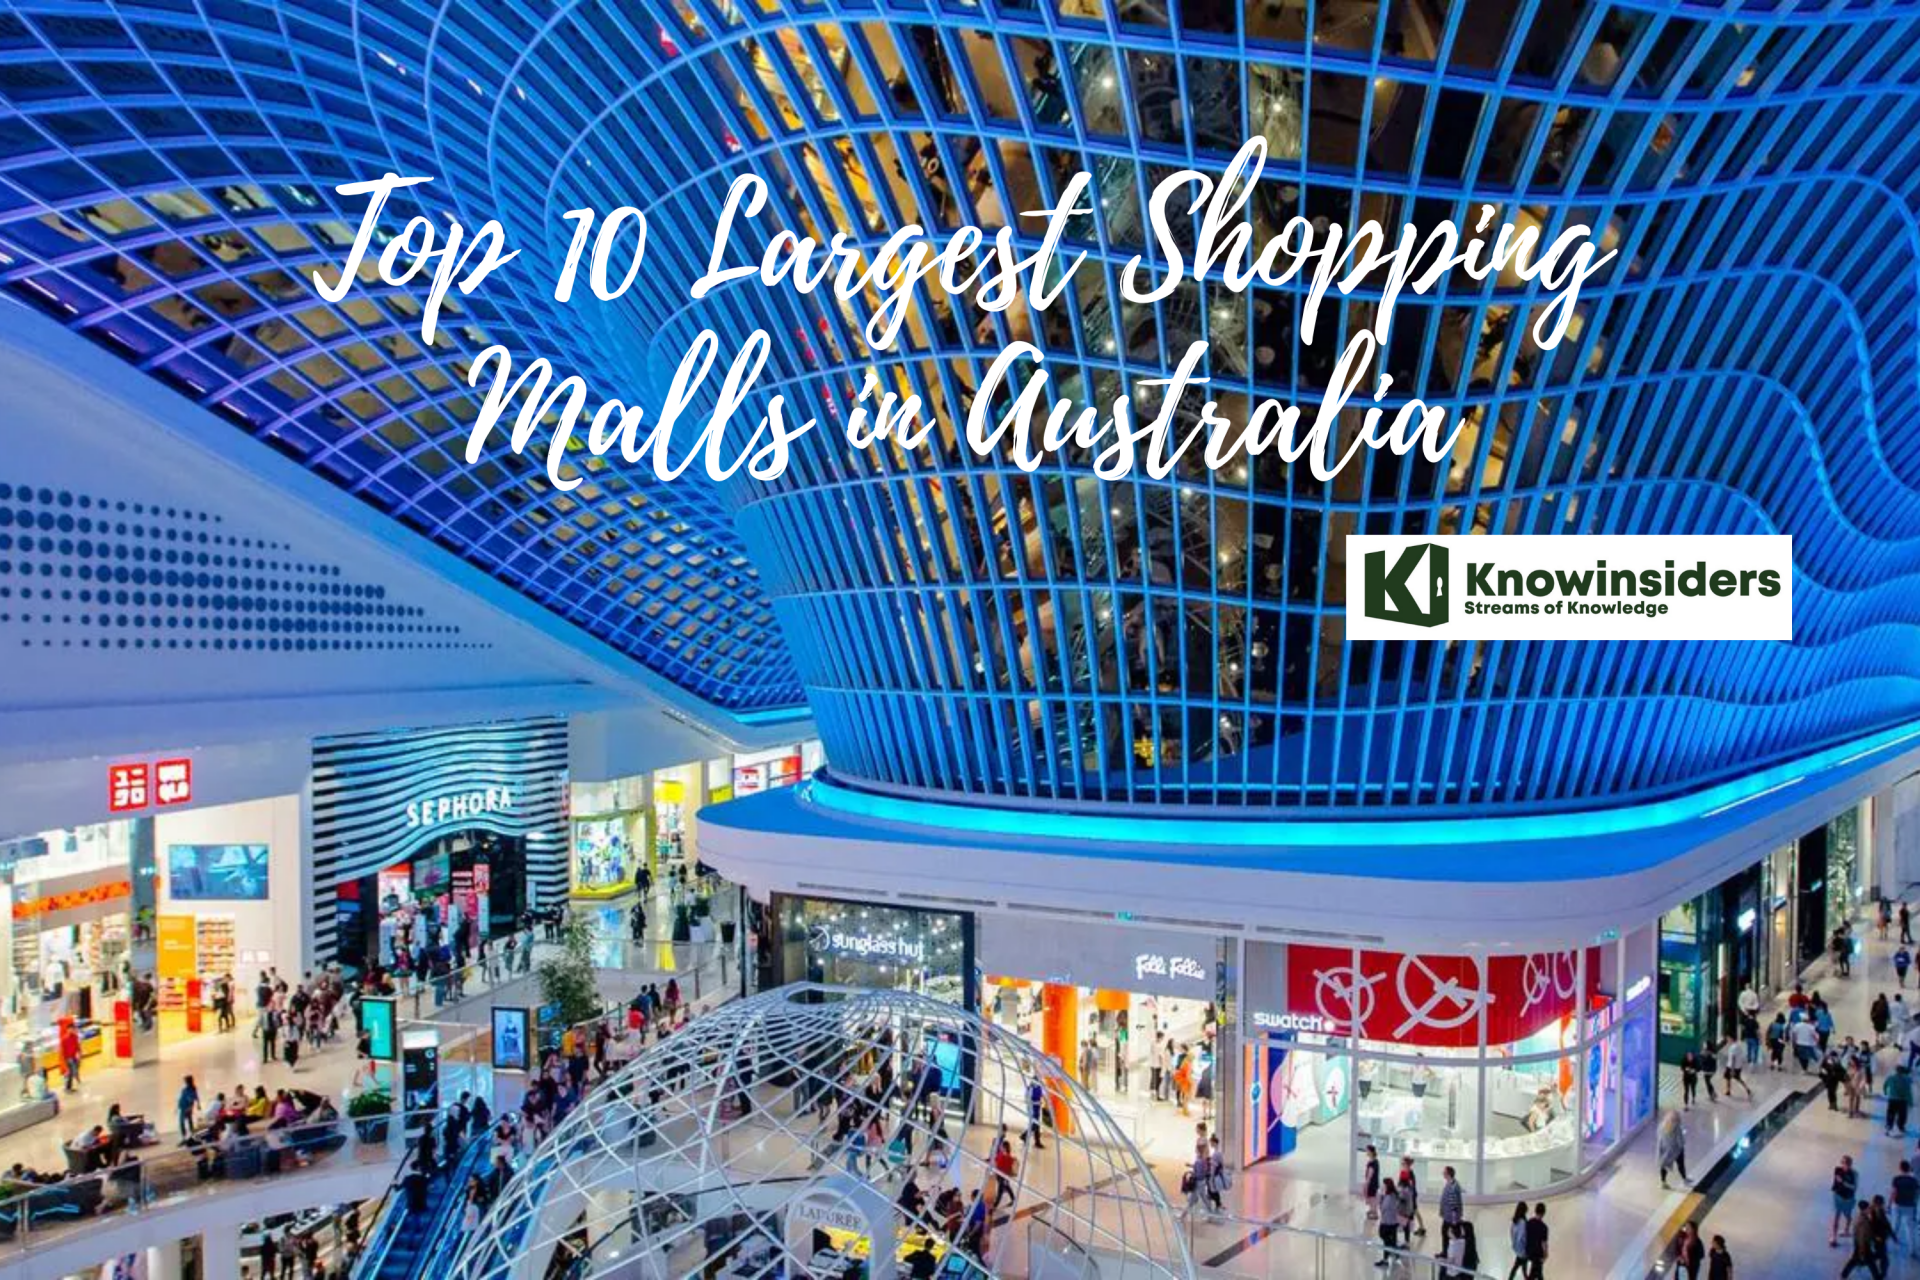 Top 10 Largest & Best Shopping Malls in Australia Today